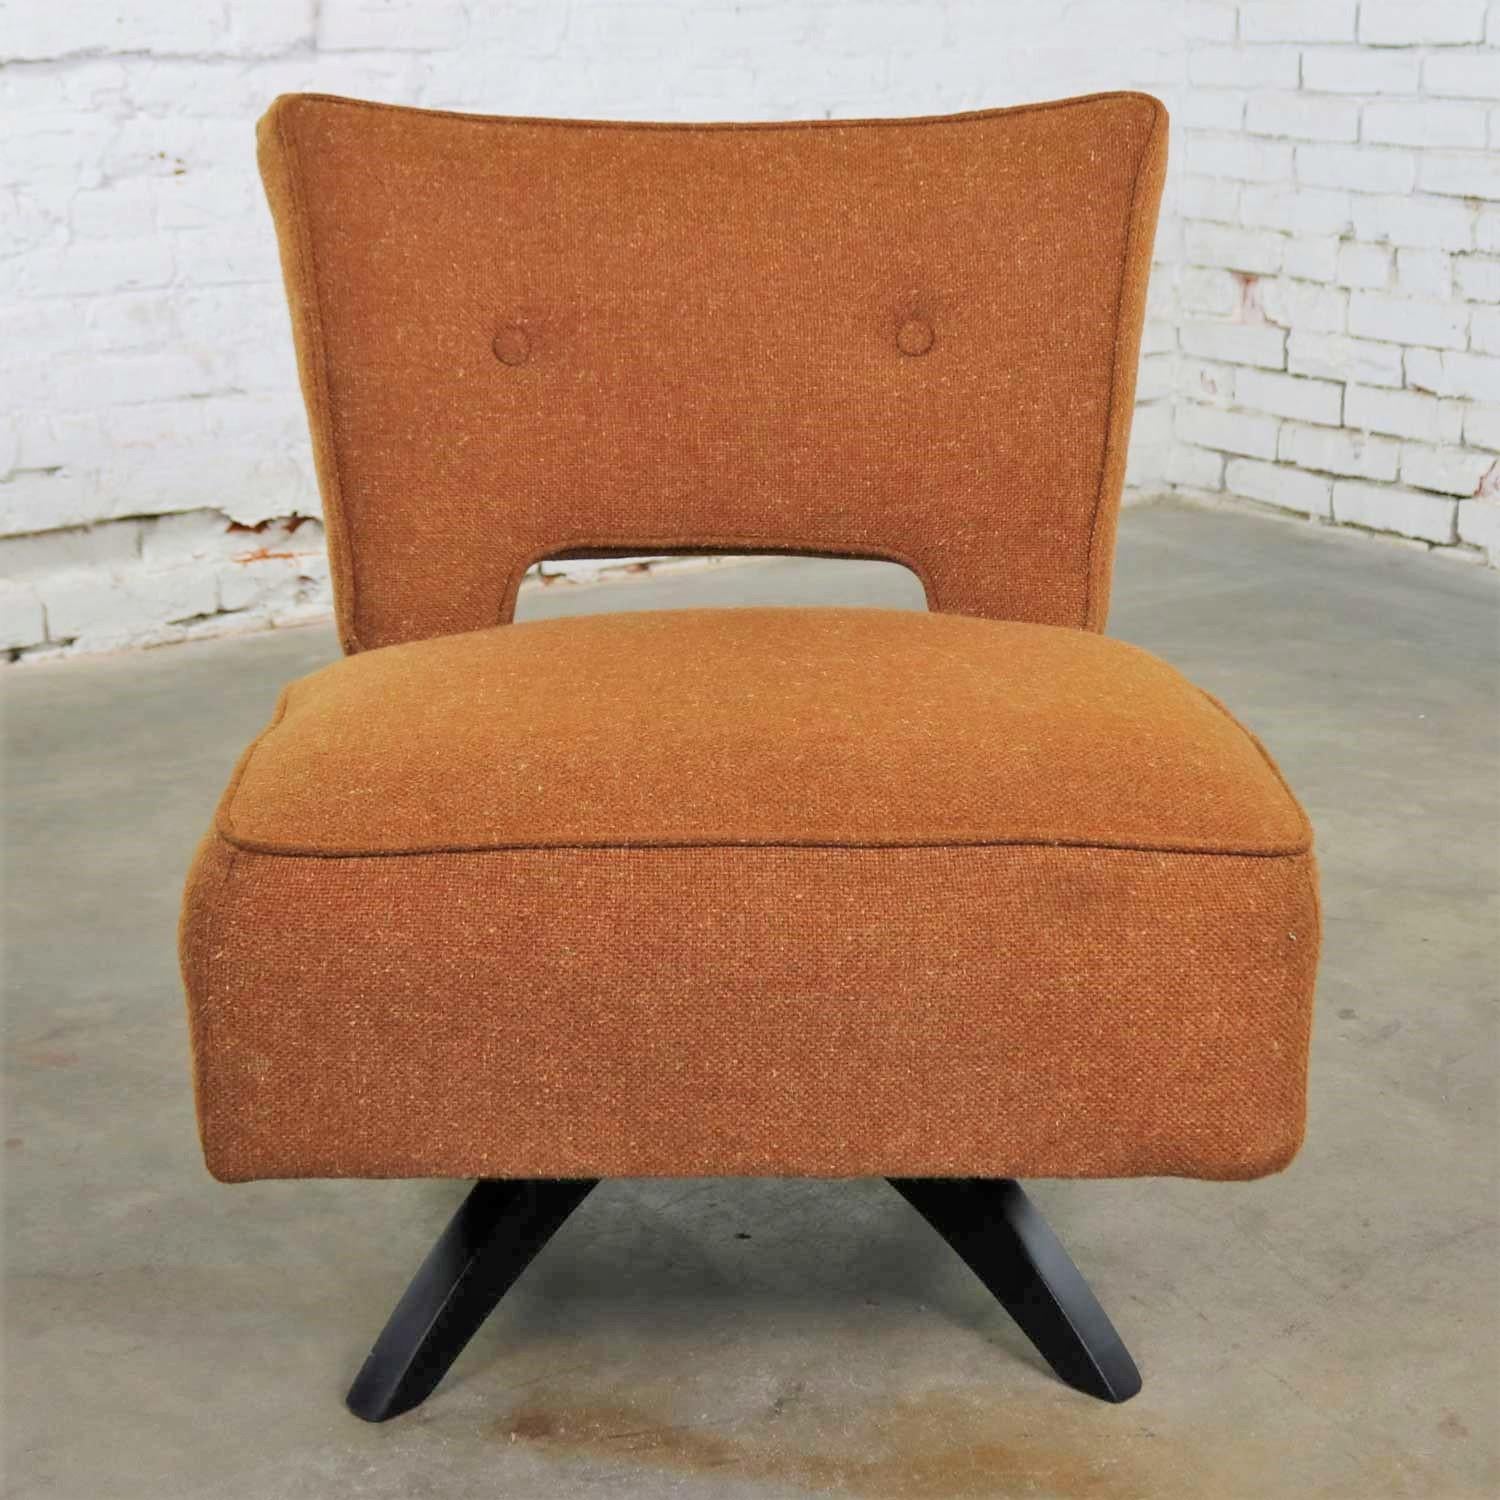 Handsome Mid-Century Modern swivel slipper chair in its original rust colored upholstery and attributed to Kroehler Manufacturing. It is in wonderful vintage condition. The upholstery has been professionally cleaned and the base has been given a